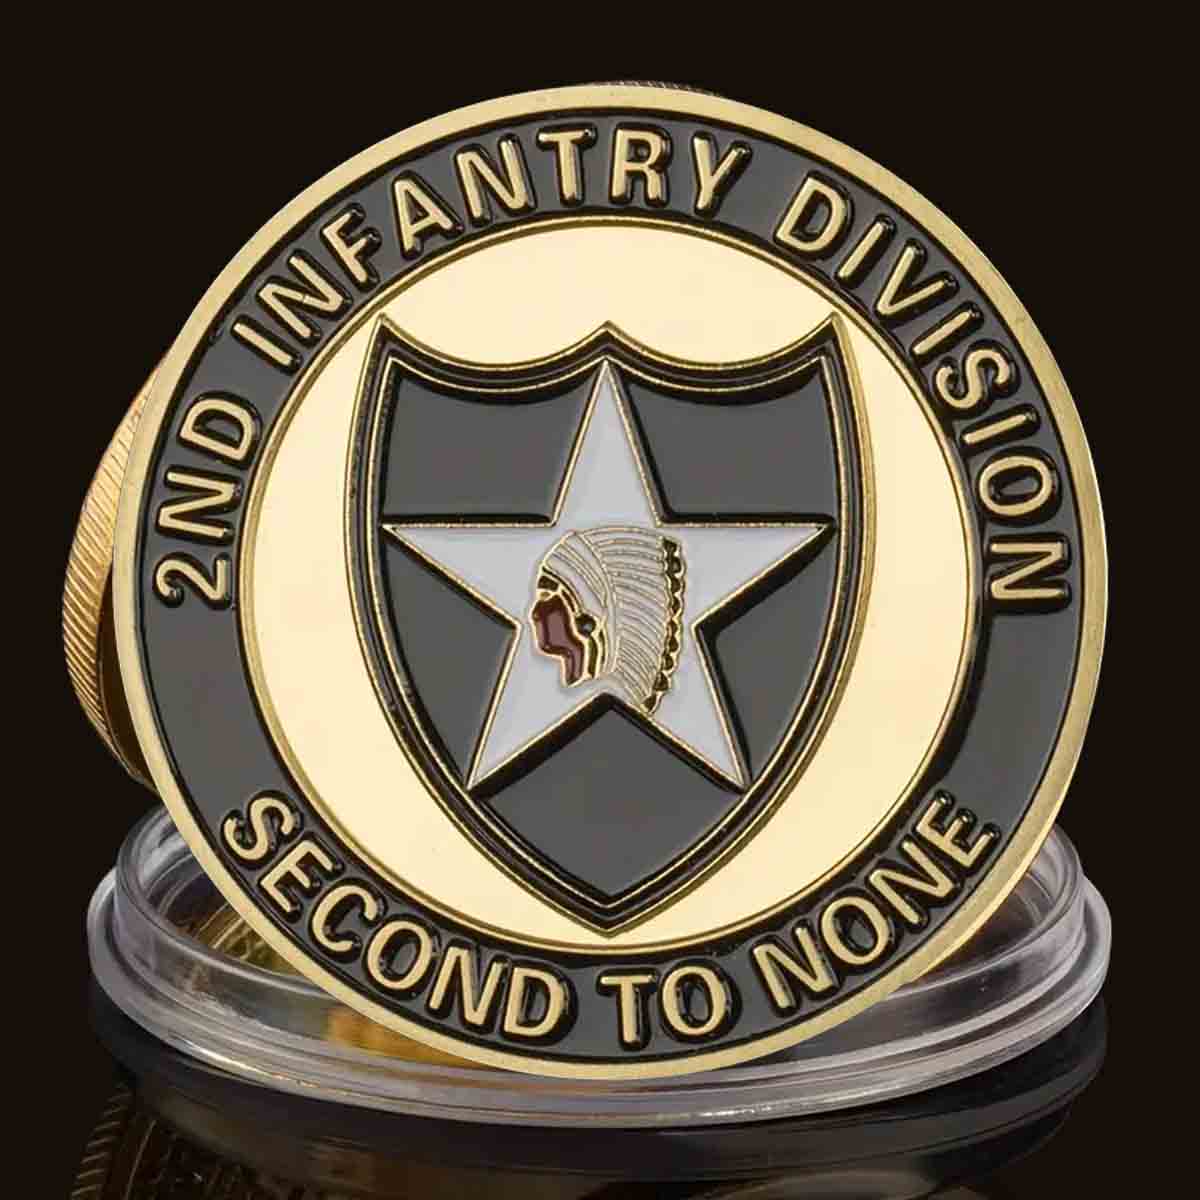 2nd Infantry Division "Second to None" Challenge Coin. High-quality Golden plating for a stunning shine and durability. Intricate design featuring the 2ID Motto. Comes in a protective plastic case to preserve its beauty and value. Patriot Gear USA American Outfitters